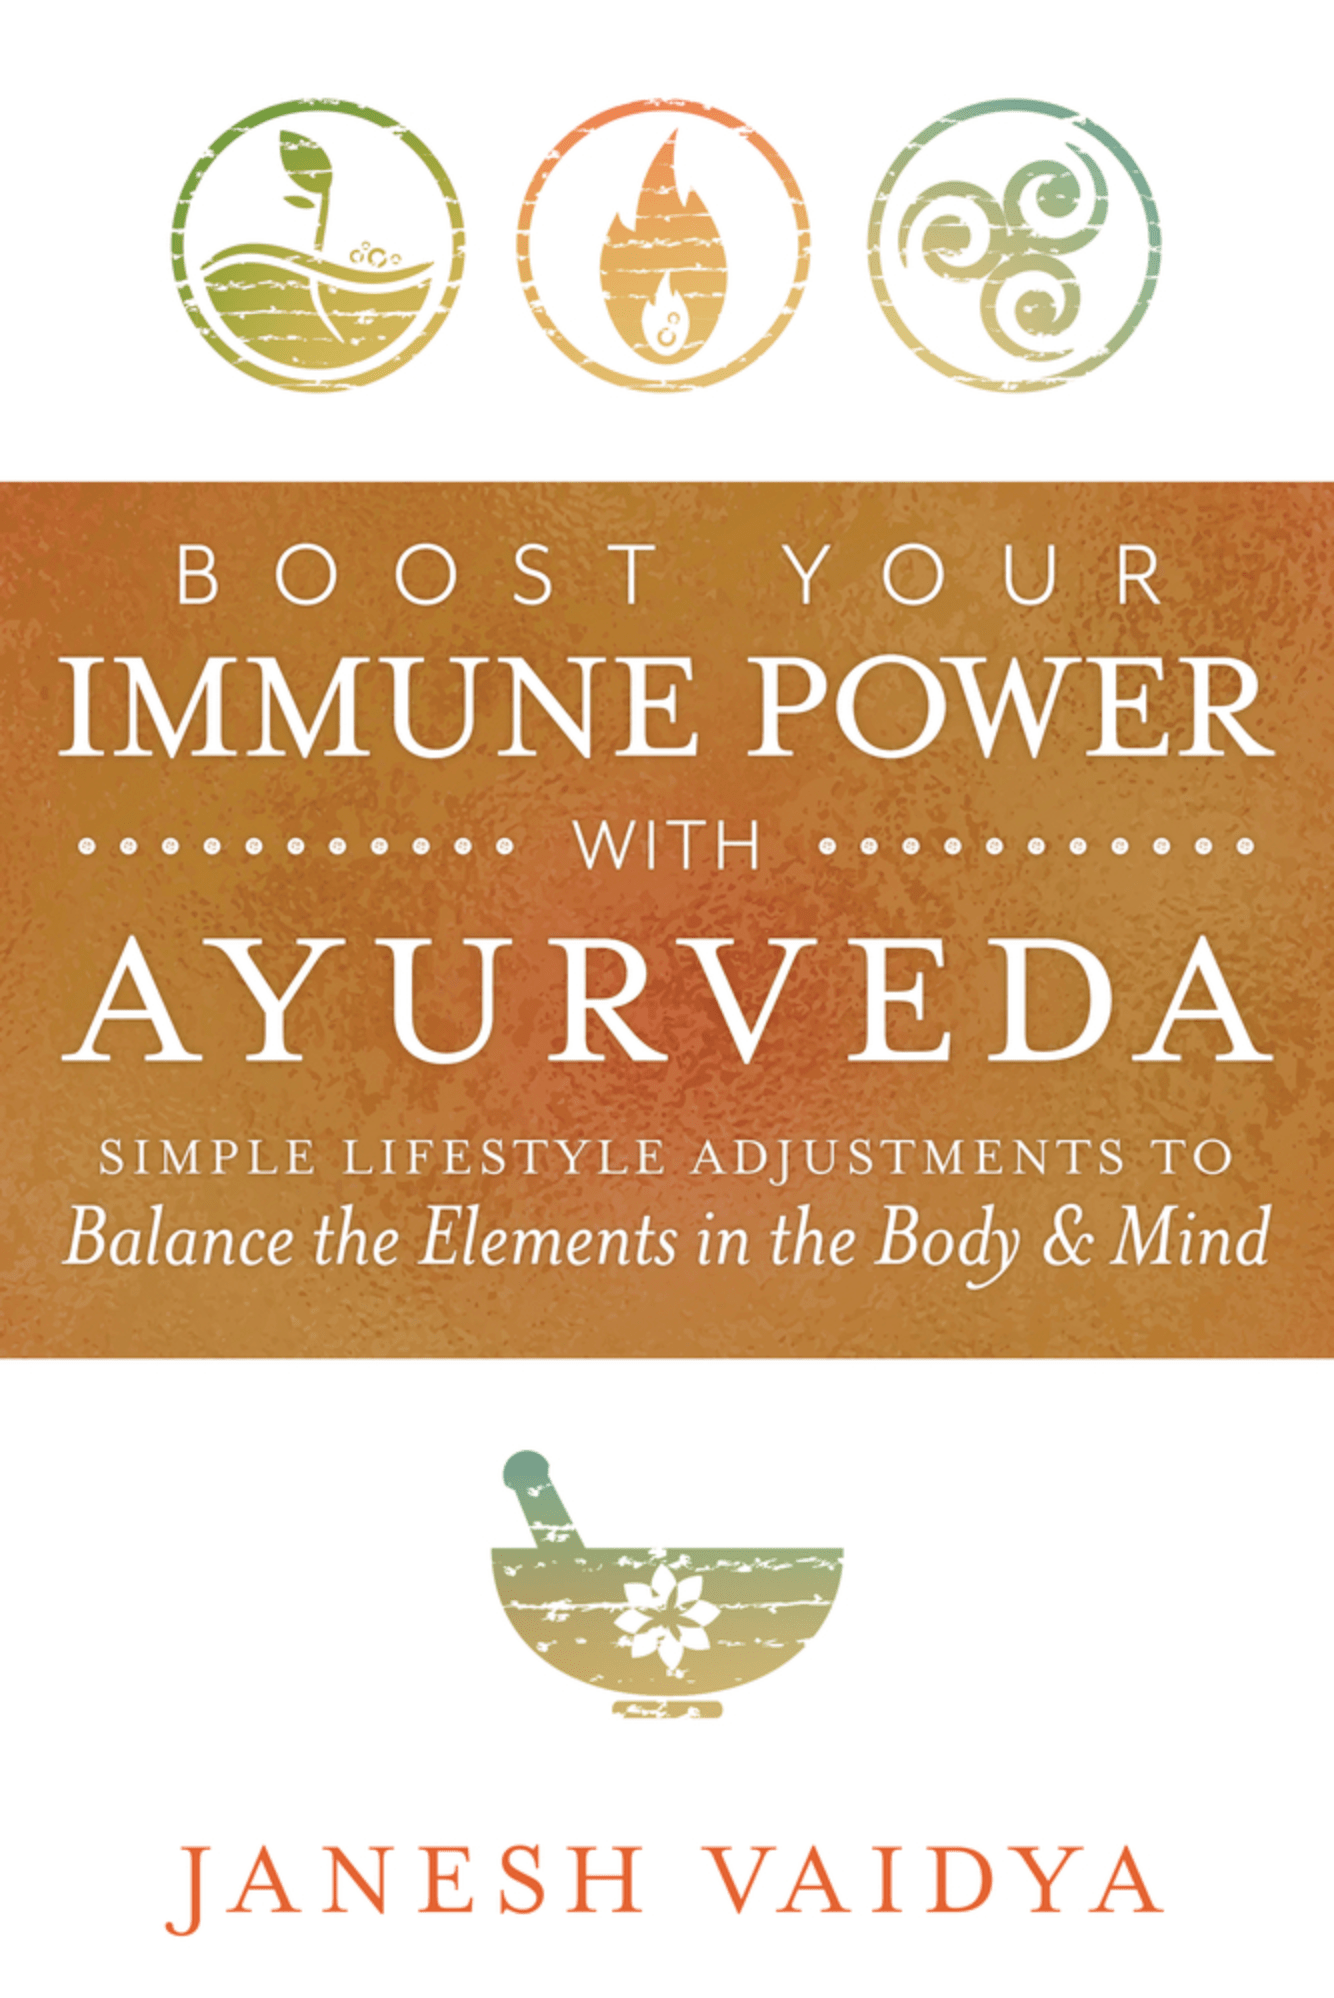 Boost Your Immune Power with Ayurveda | Simple Lifestyle Adjustments to Balance the Elements in the Body & Mind - Spiral Circle